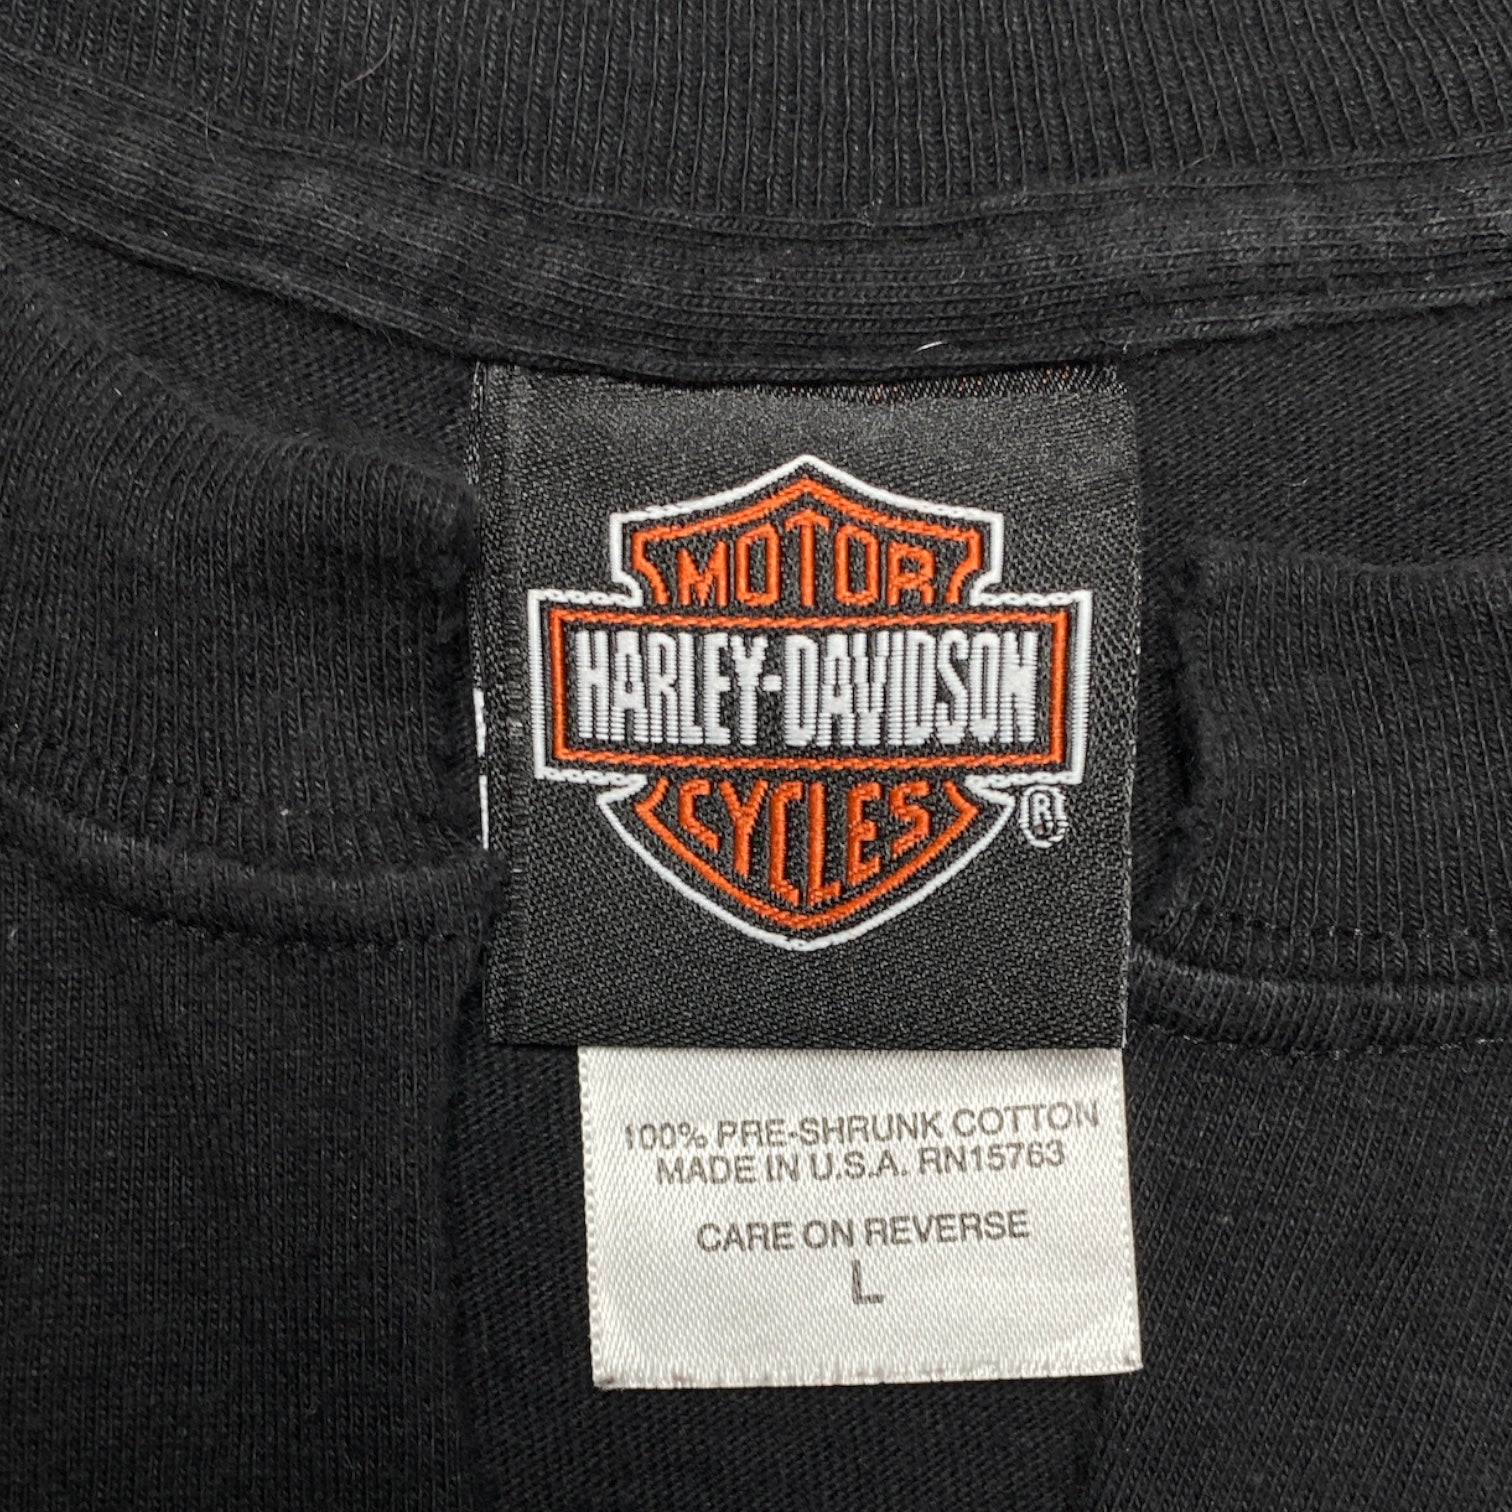 HARLEY-DAVIDSON MOTOR CYCLES bigger is better Tee Made in USA